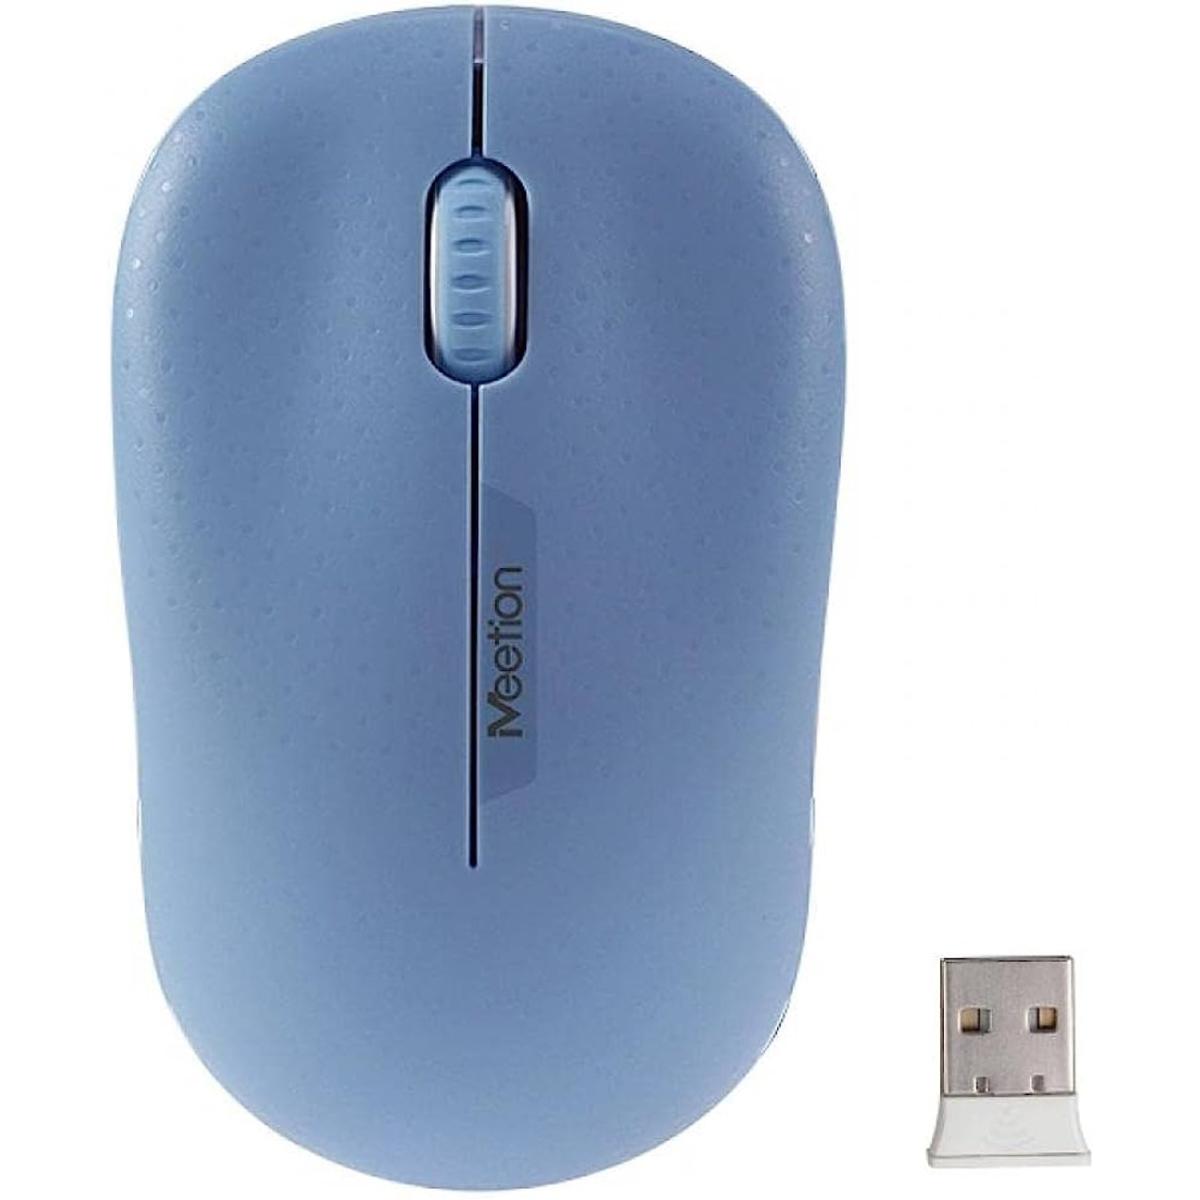 MeeTion MT-R545 Cordless Optical Usb Computer 2.4GHz Wireless Mouse -Blue